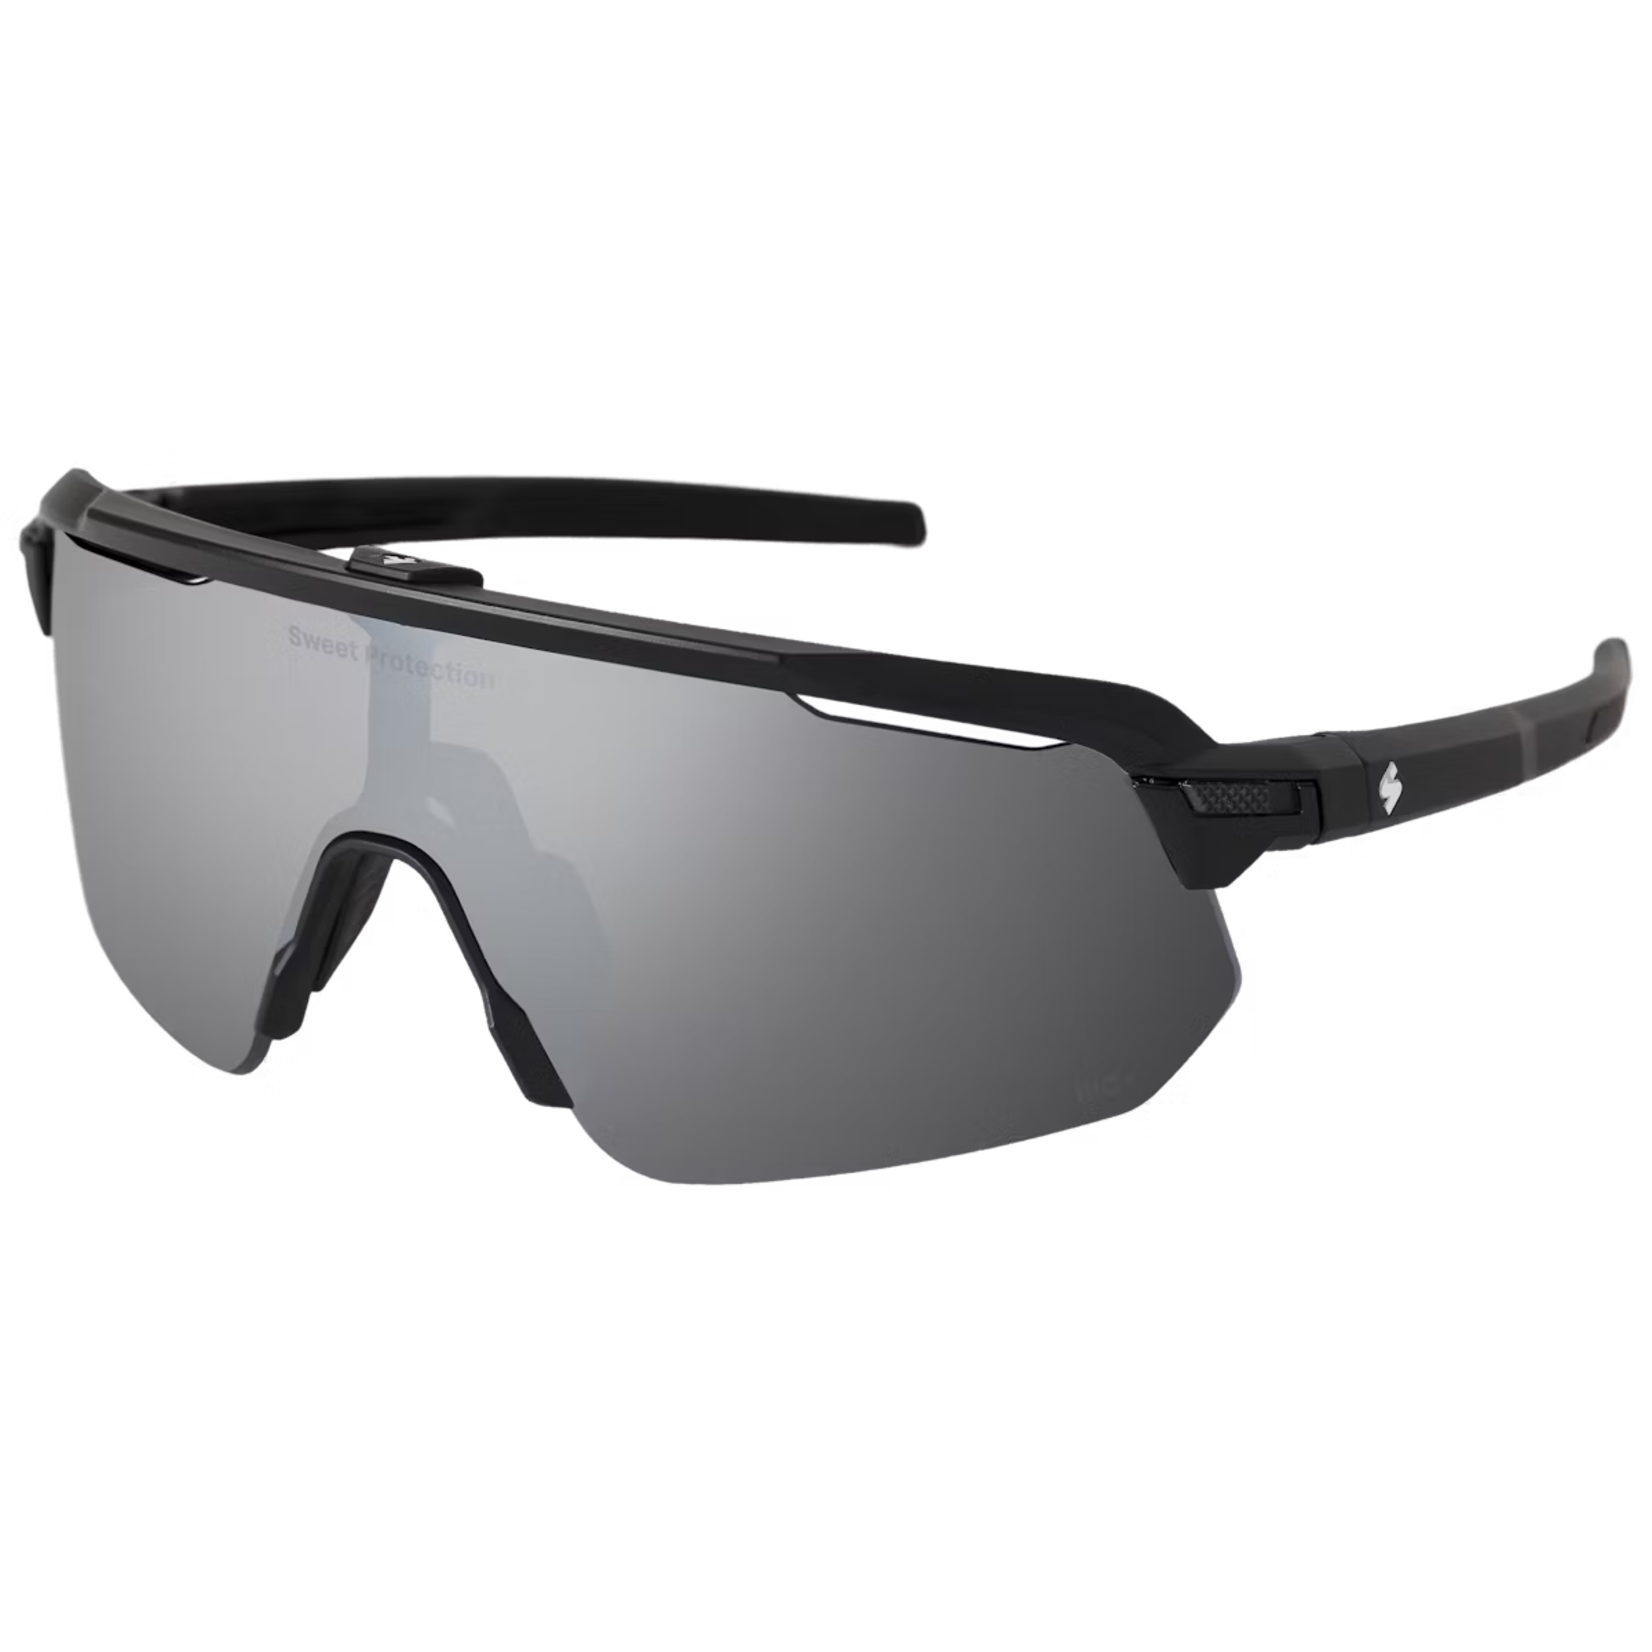 Sweet Protection Sweet Protection Shinobi RIG Reflect Cycling Glasses Matte Black/ RIG Obsidian Lens